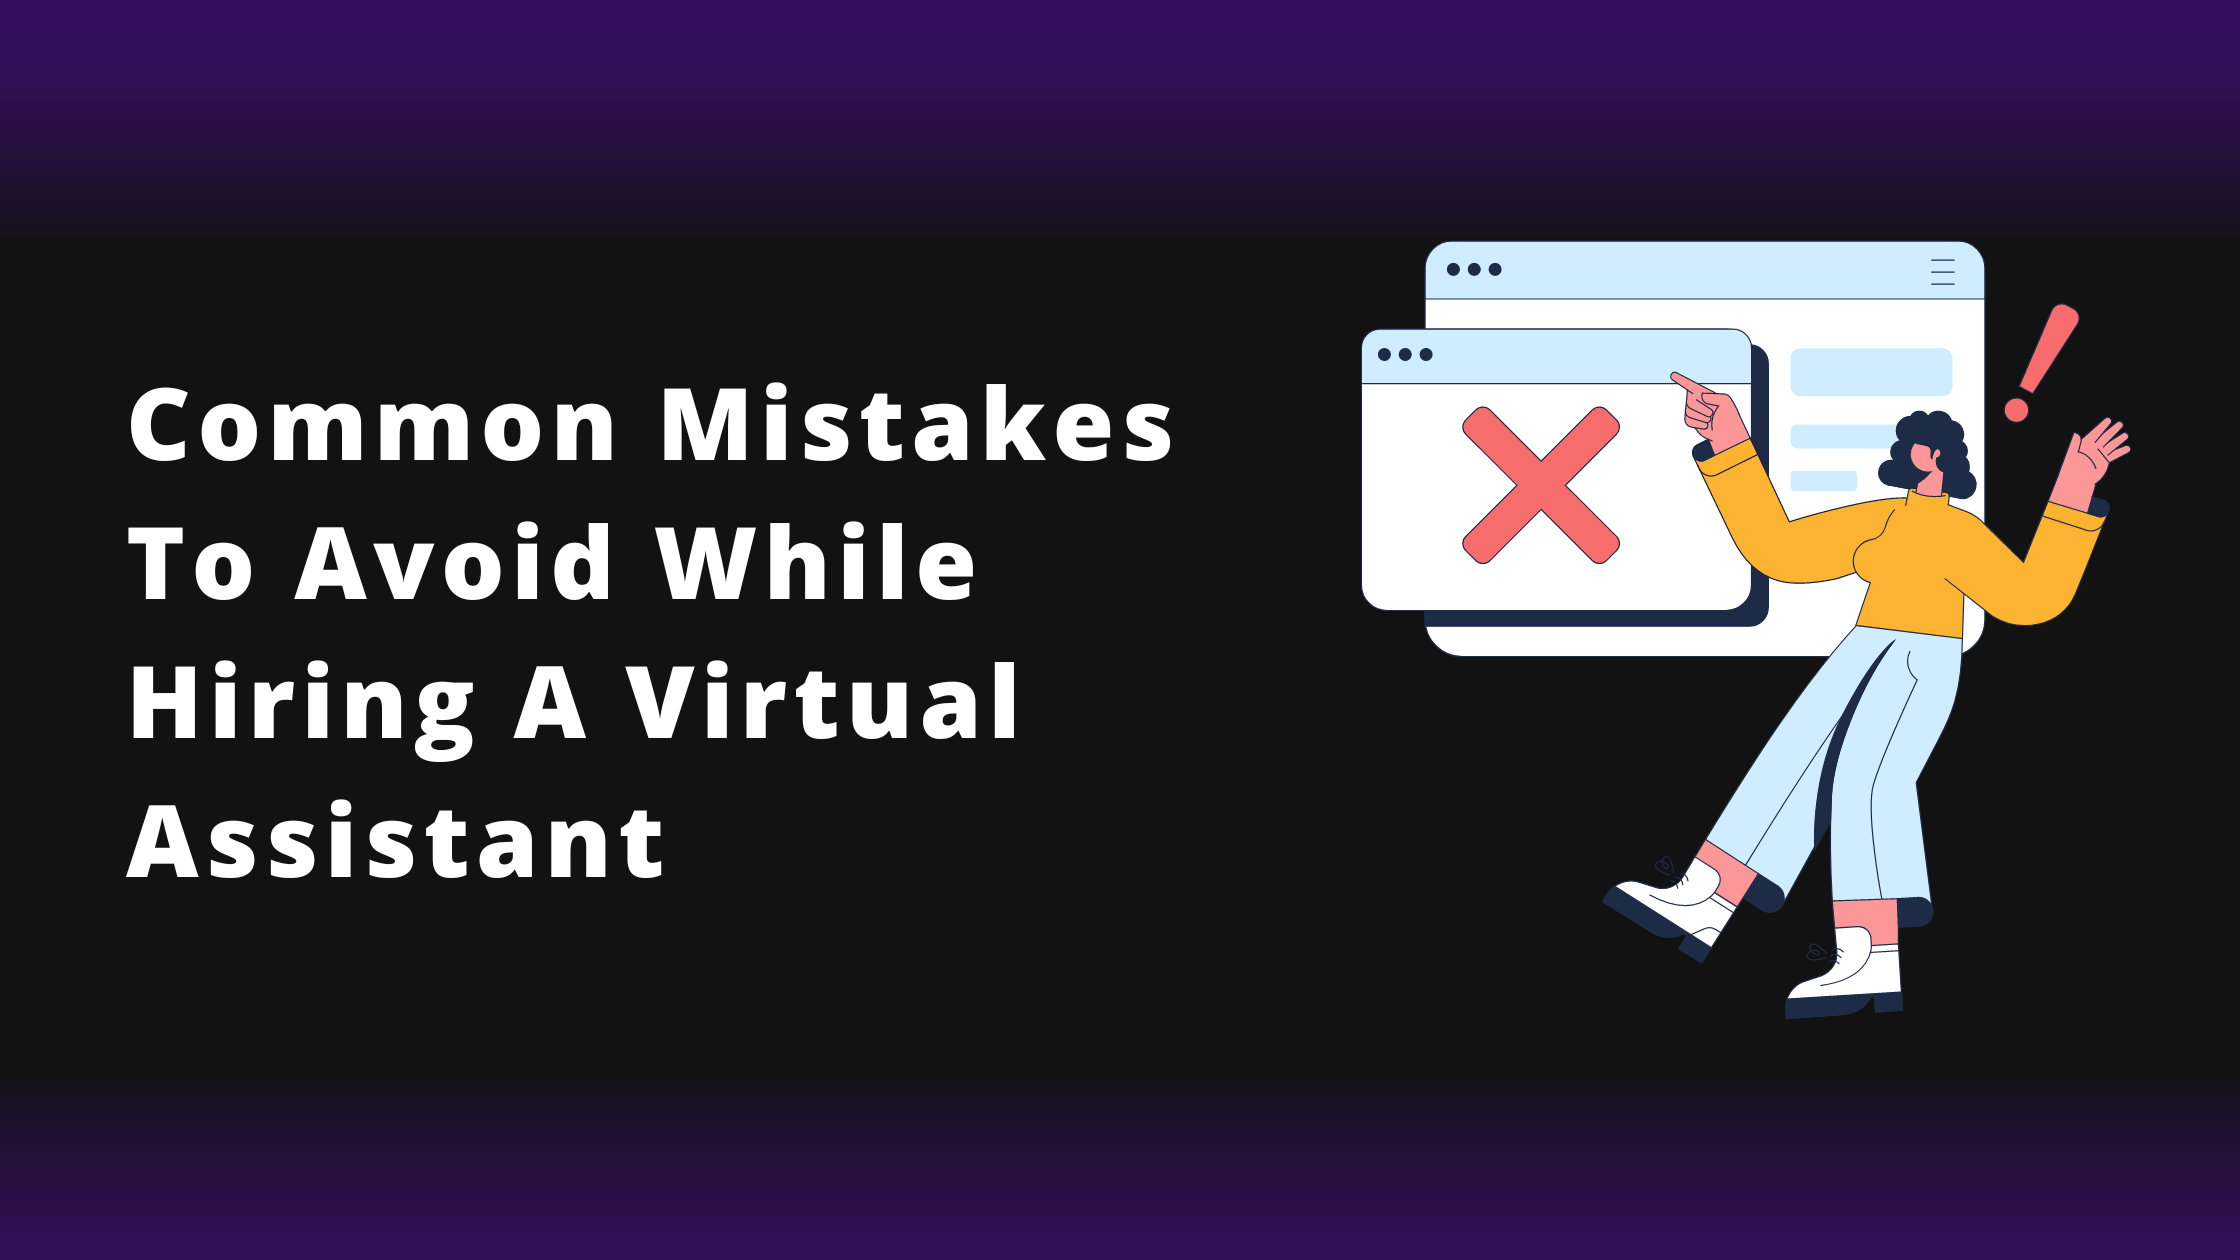 Common mistakes to avoid while hiring a Virtual Assistant